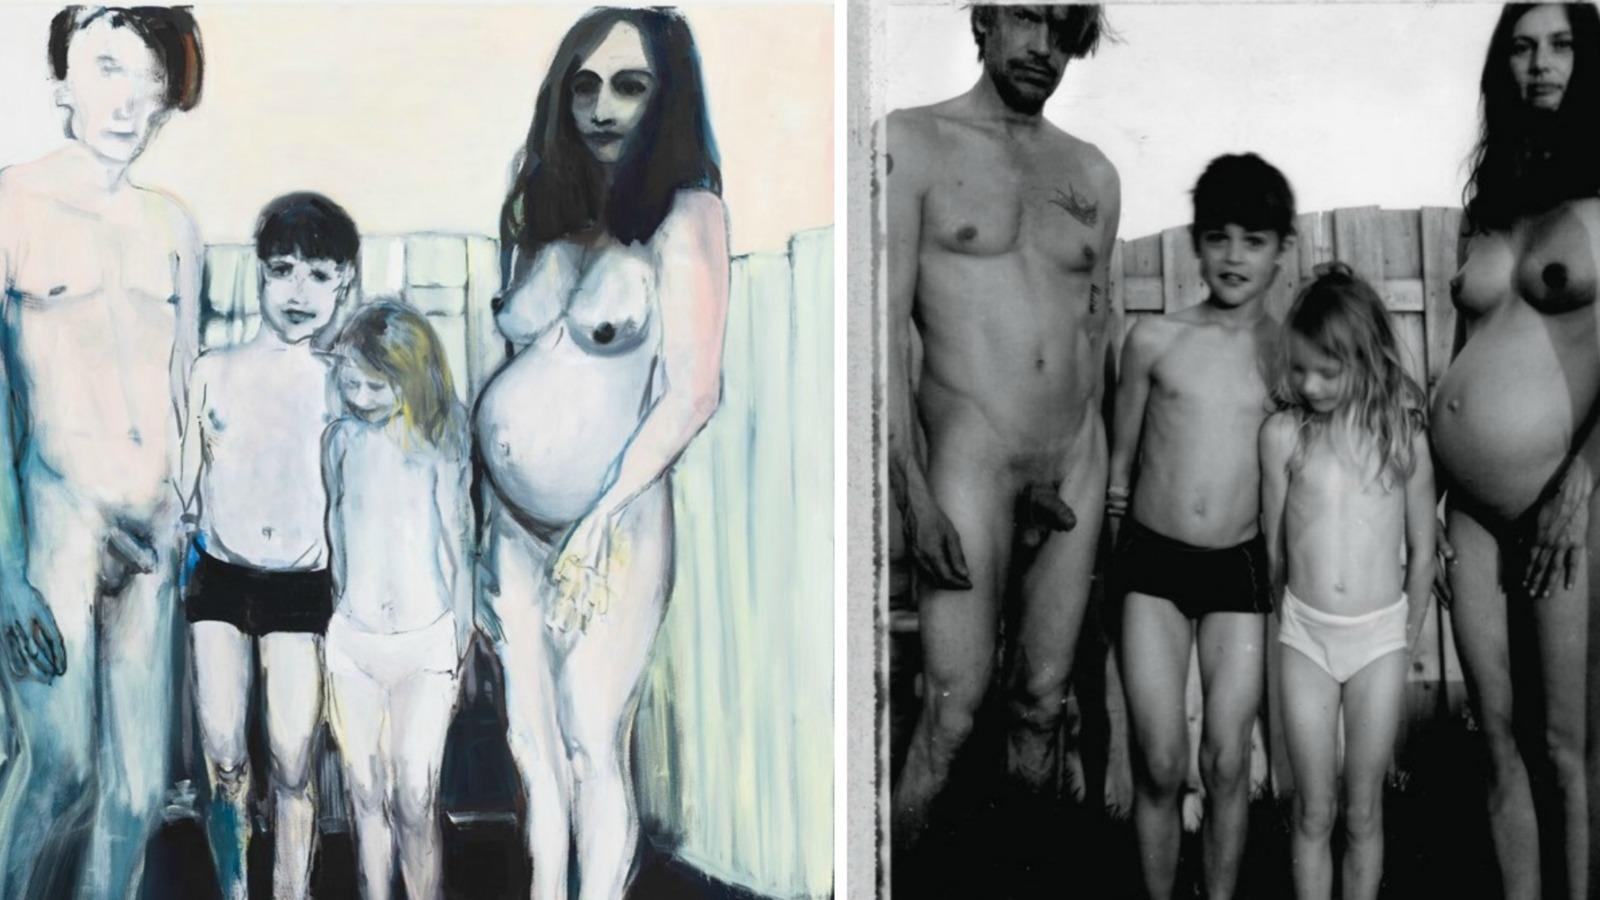 For 30 years Andre van Noord was a succesful international model. I his later carreer he was an art photographer. The picture he made of his family (title 'For the Baby') was the inspiration for Marlene Dumas work 'the nuclear family', shown in the